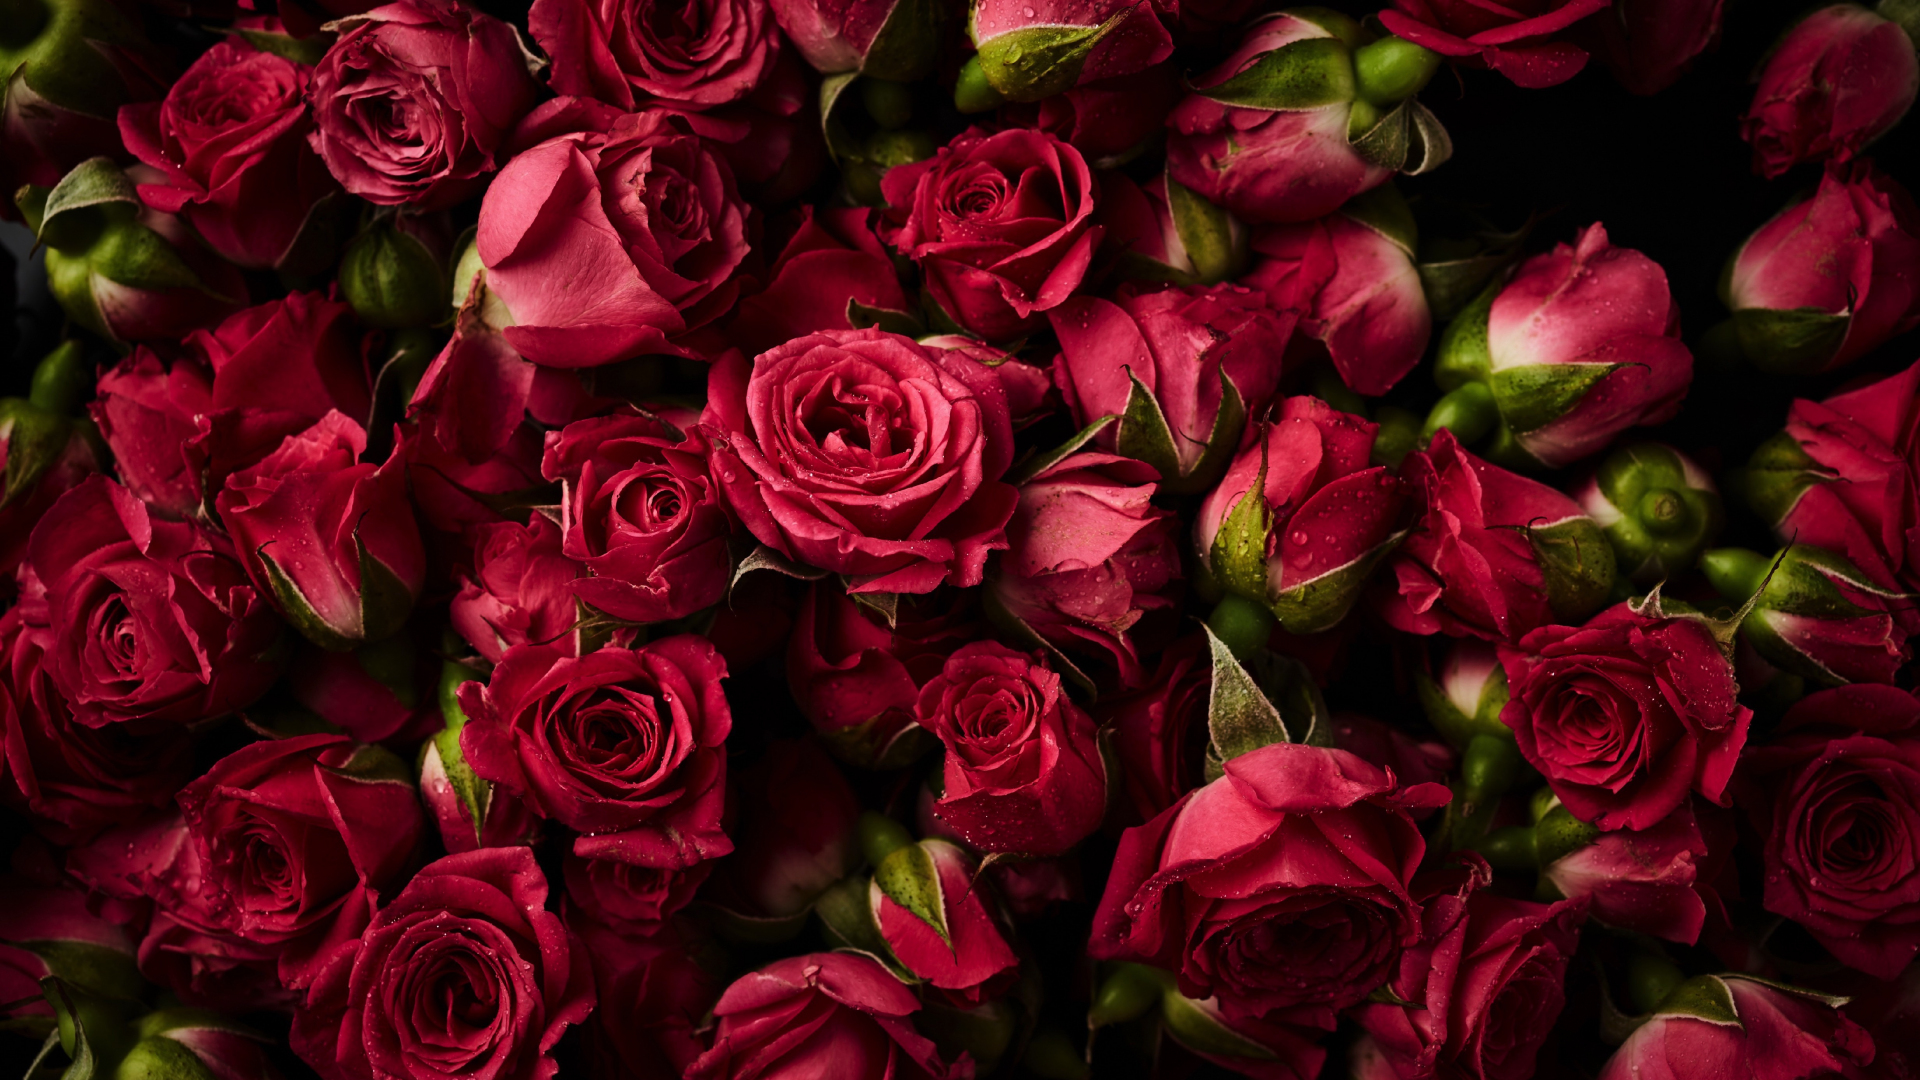 Download wallpaper 1920x1080 pink roses, buds, flowers, full hd, hdtv, fhd, 1080p  wallpaper, 1920x1080 hd background, 2616